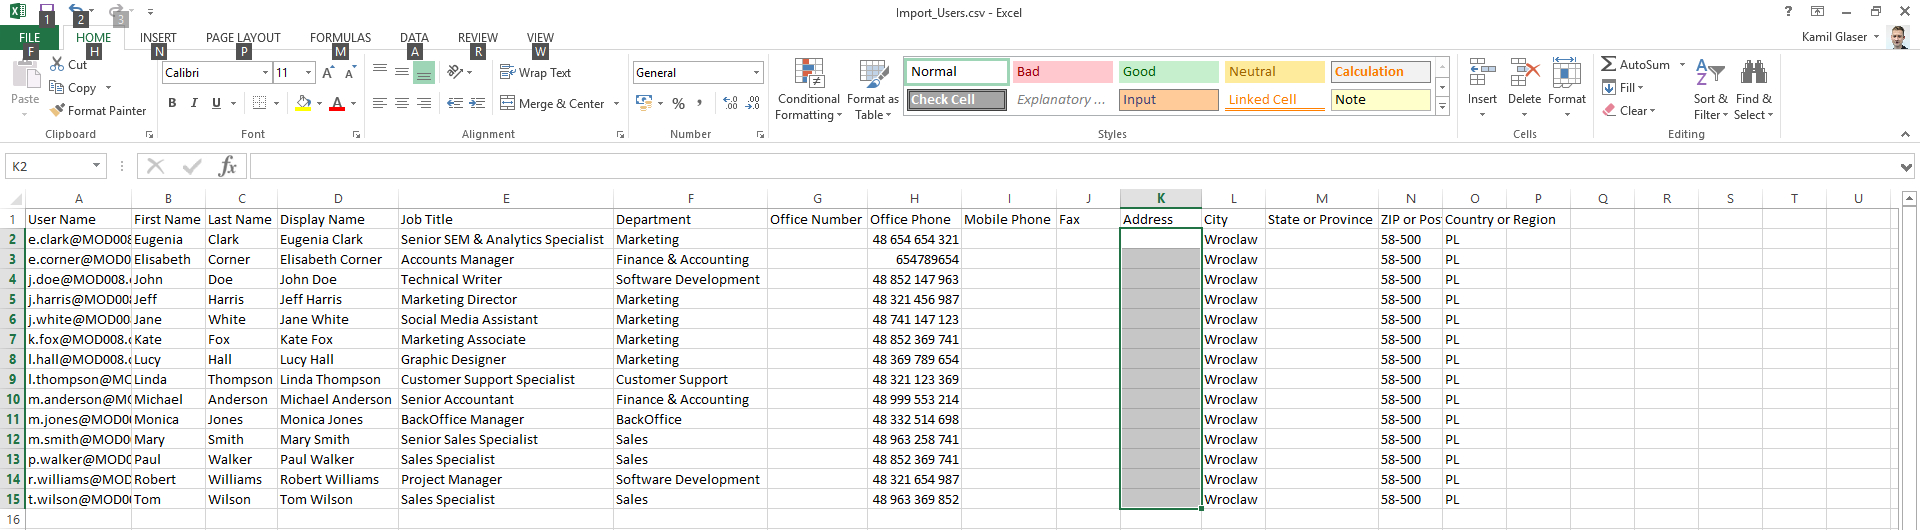 Active Directory User Attributes Spreadsheet In How To Export Users From Active Directory  Admin's Blog